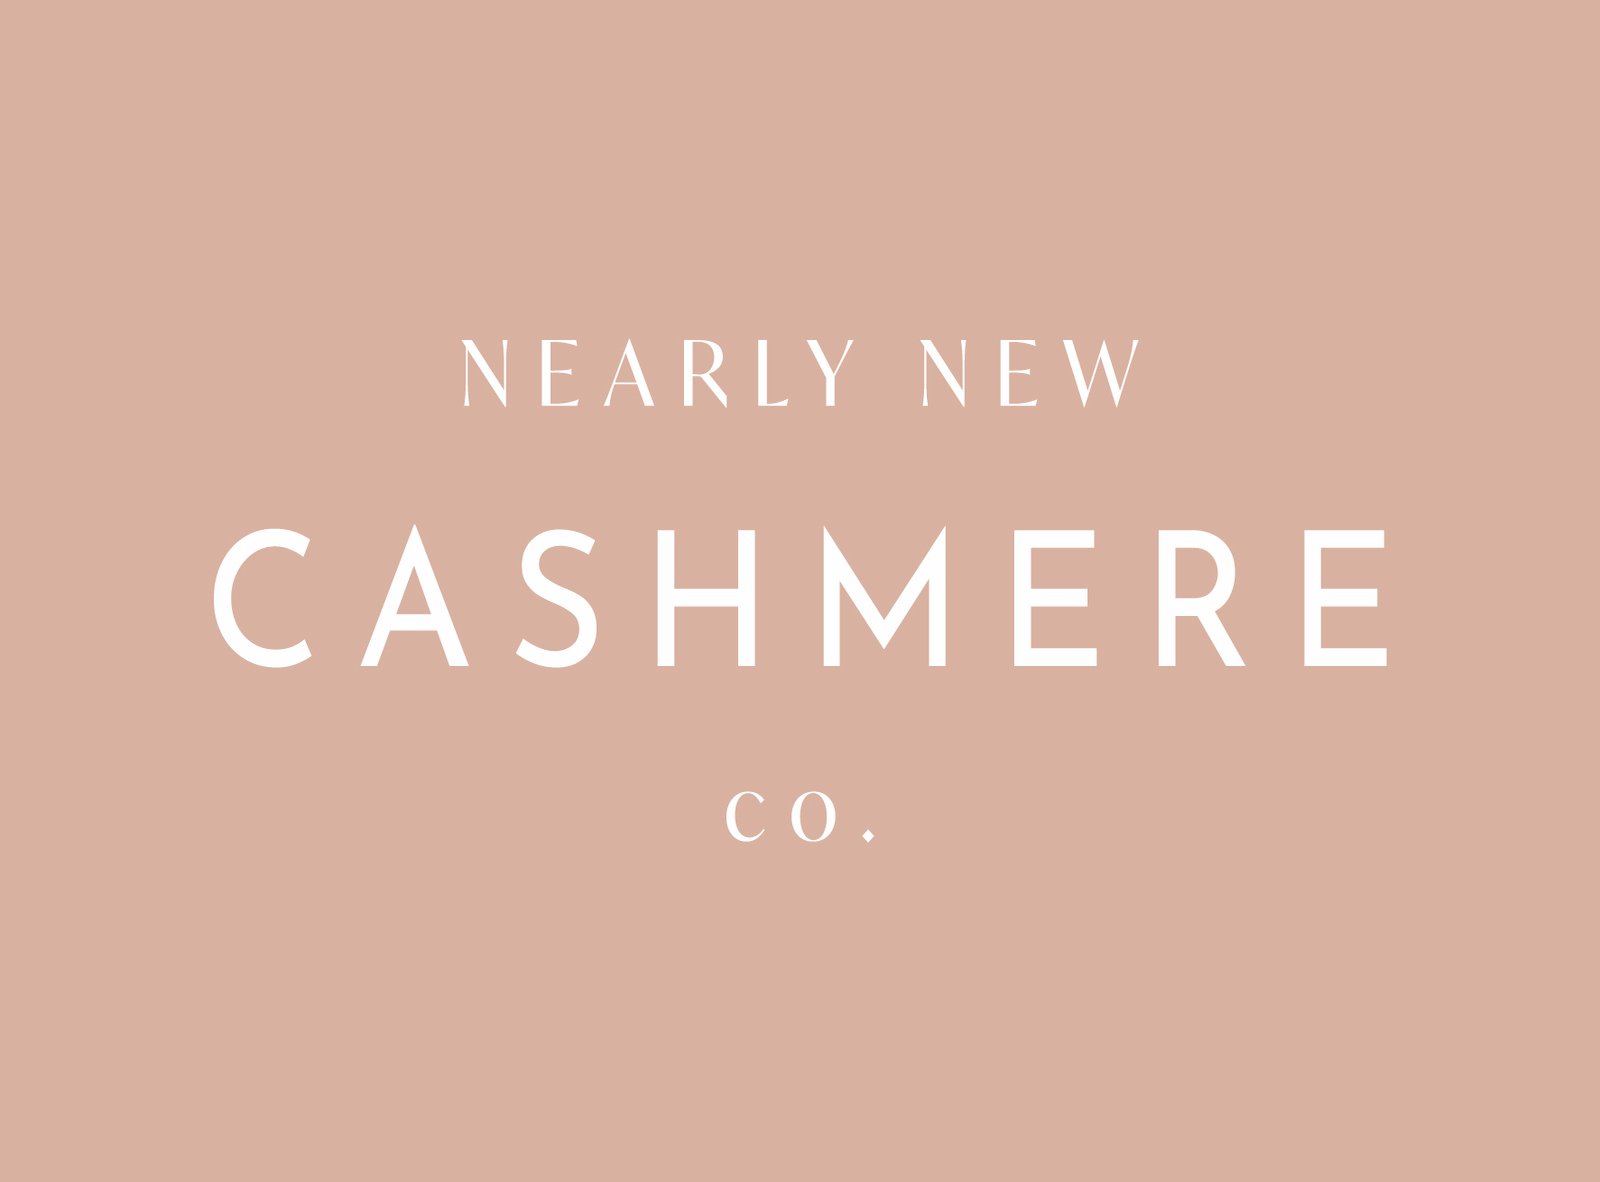 NEARLY NEW CASHMERE CO.